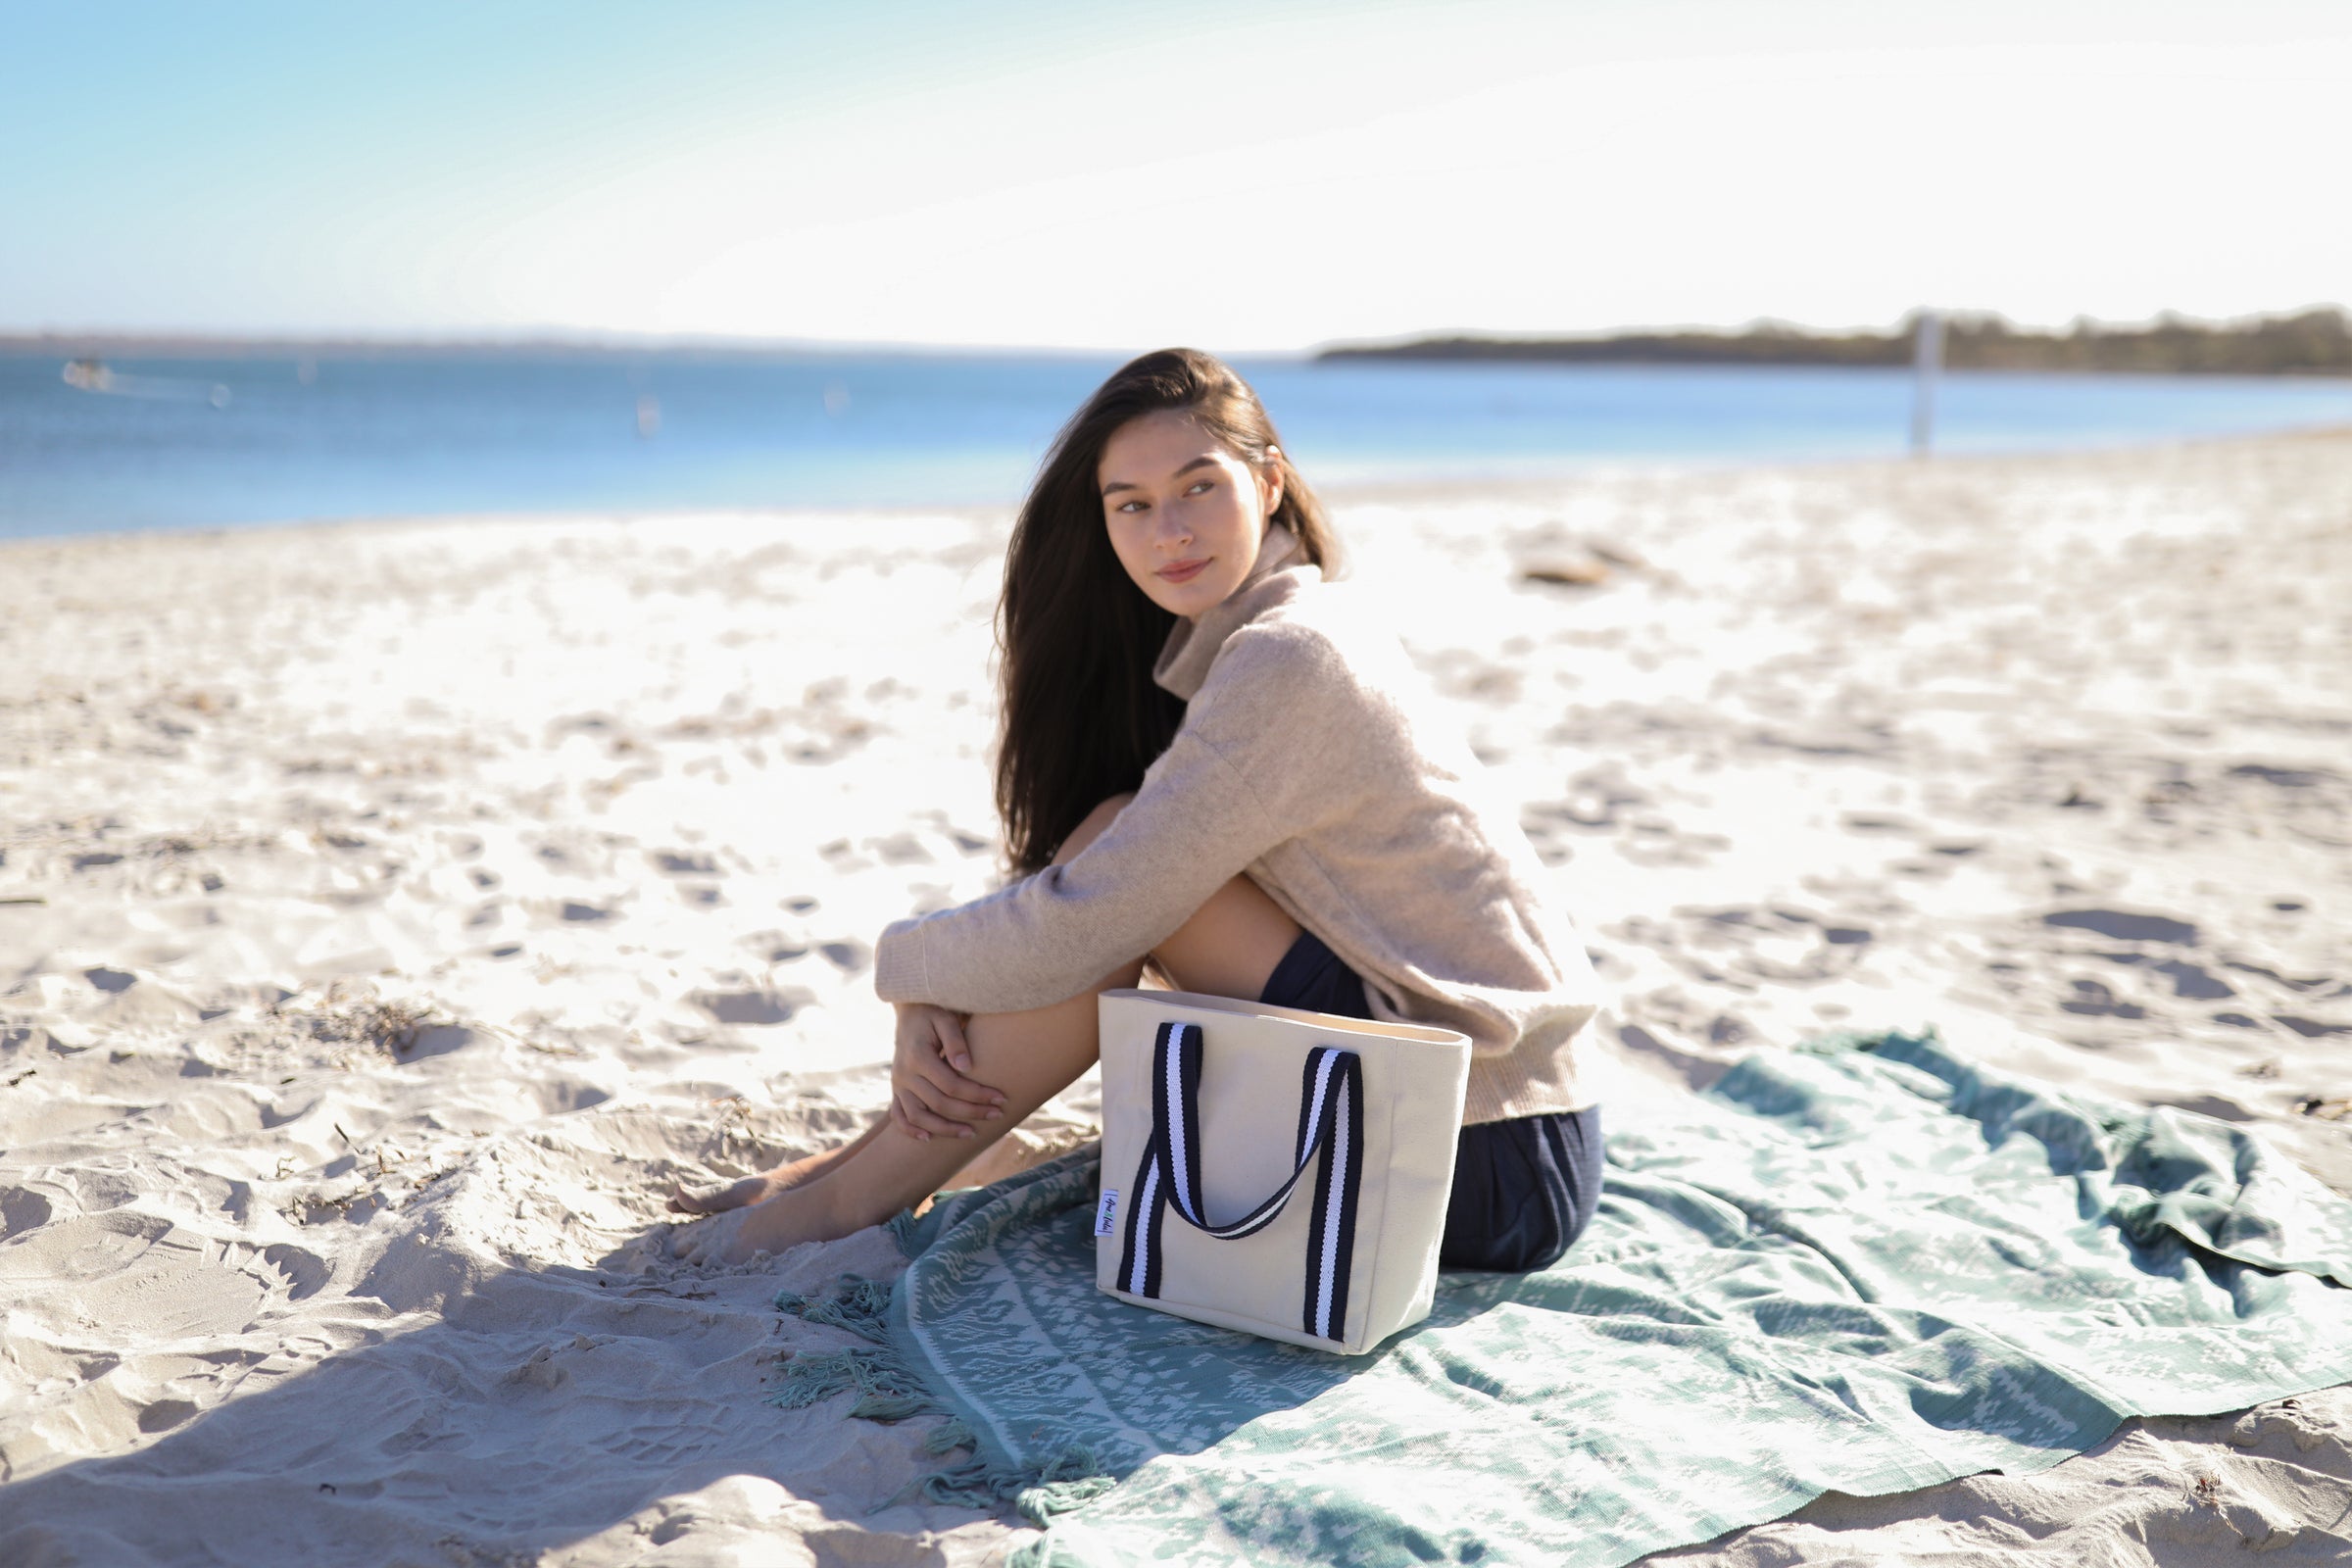 A woman with long brown hair blowing in the wind sits on a beach towel on the beach. There is sand around here and the ocean behind her. On the beach towel in front on her is a small canvas beach tote with navy and white handles.